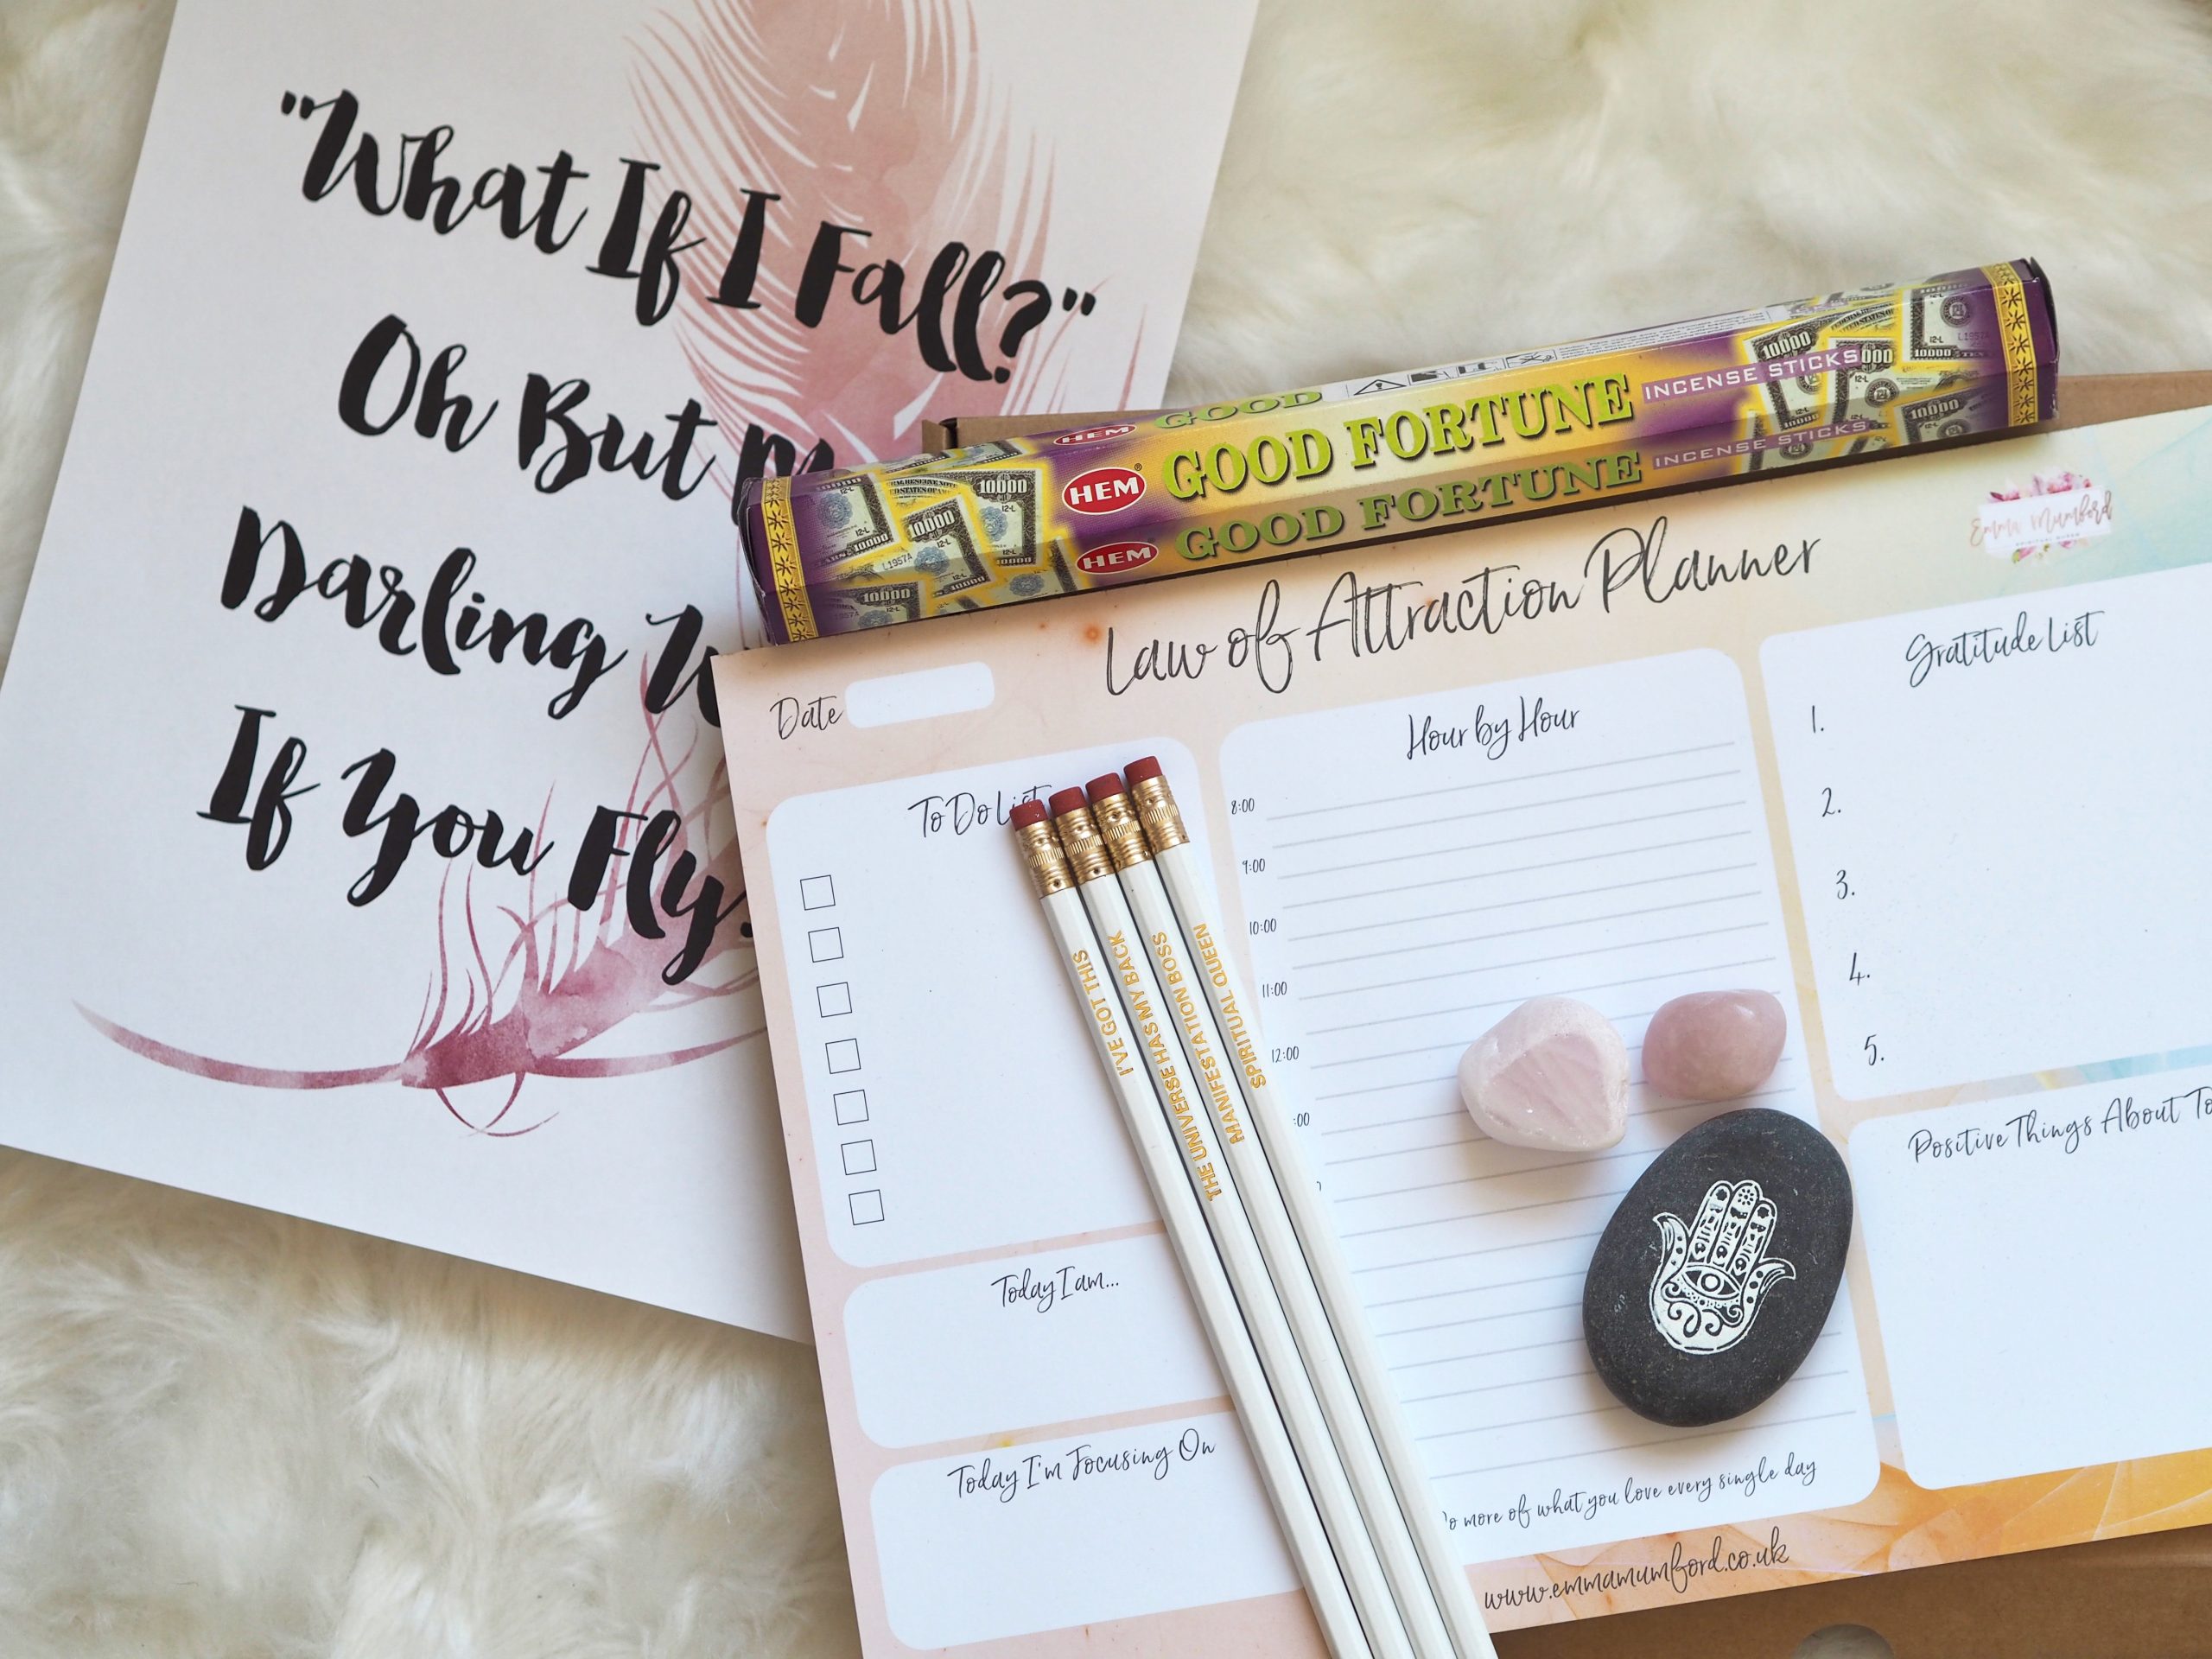 LAUNCHING MY OWN LAW OF ATTRACTION BOXES - Emma Mumford